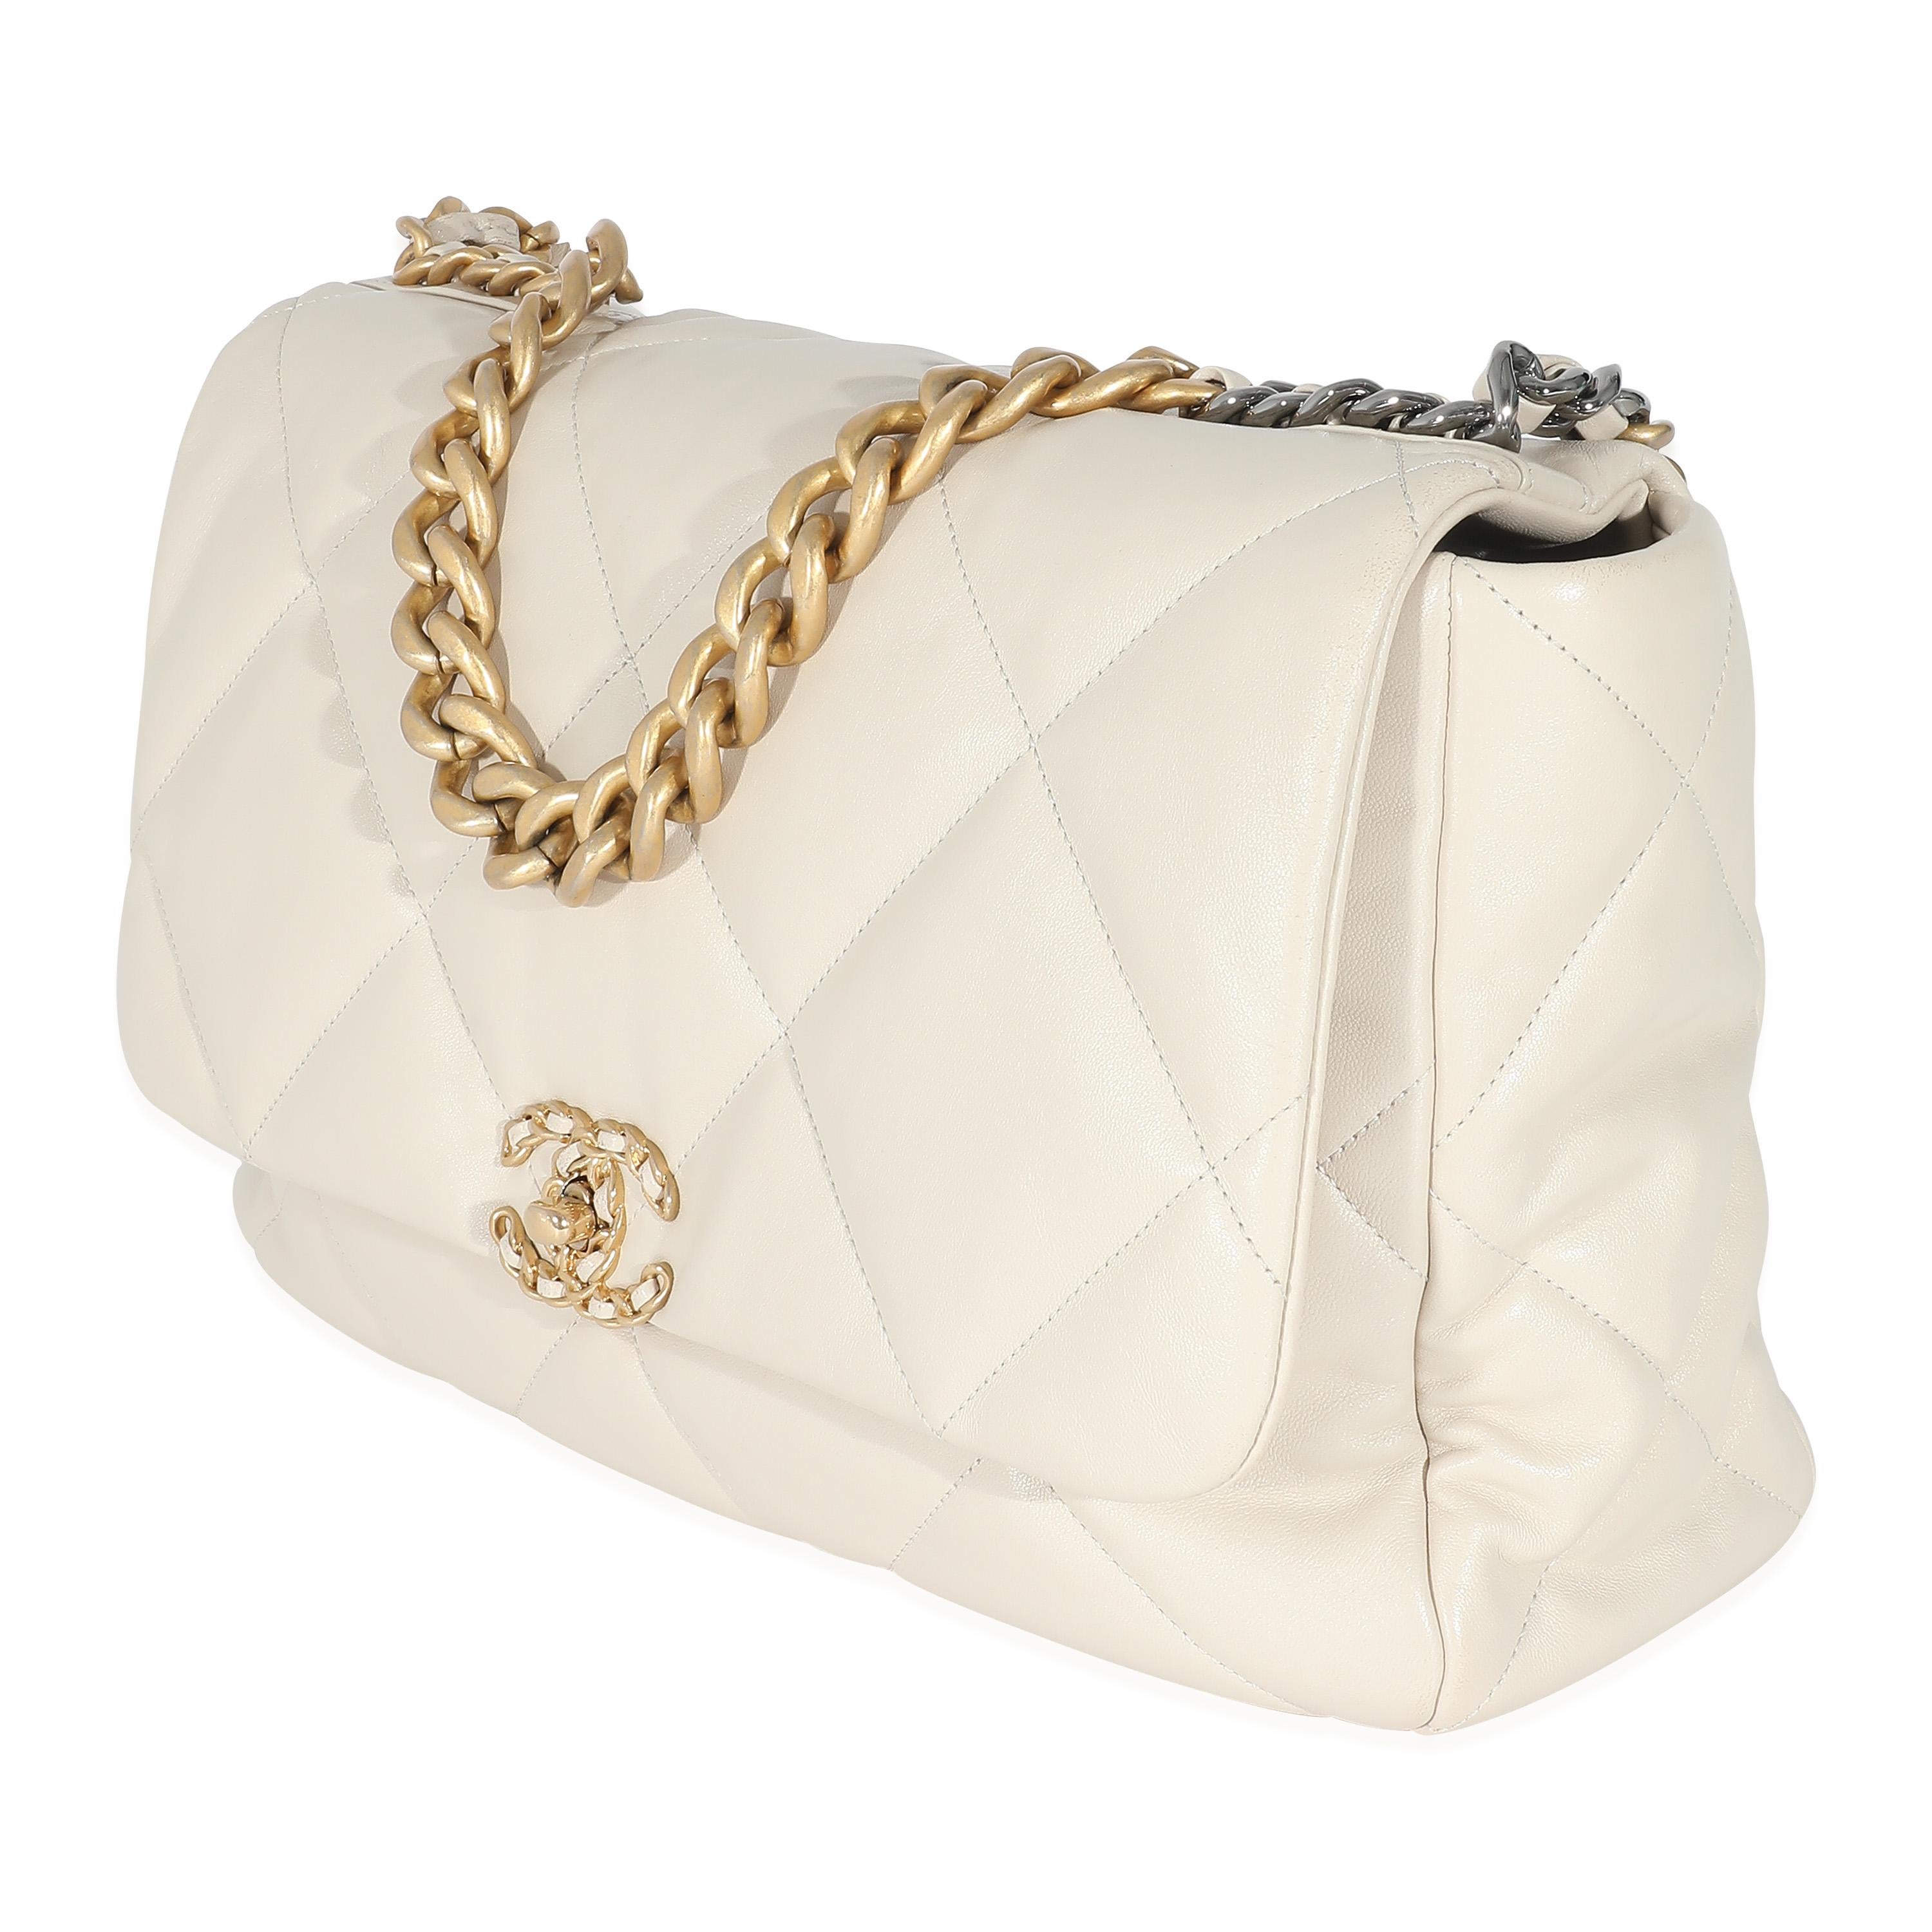 Chanel Ivory Shiny Quilted Lambskin Maxi Chanel 19 Flap Bag In Excellent Condition For Sale In New York, NY